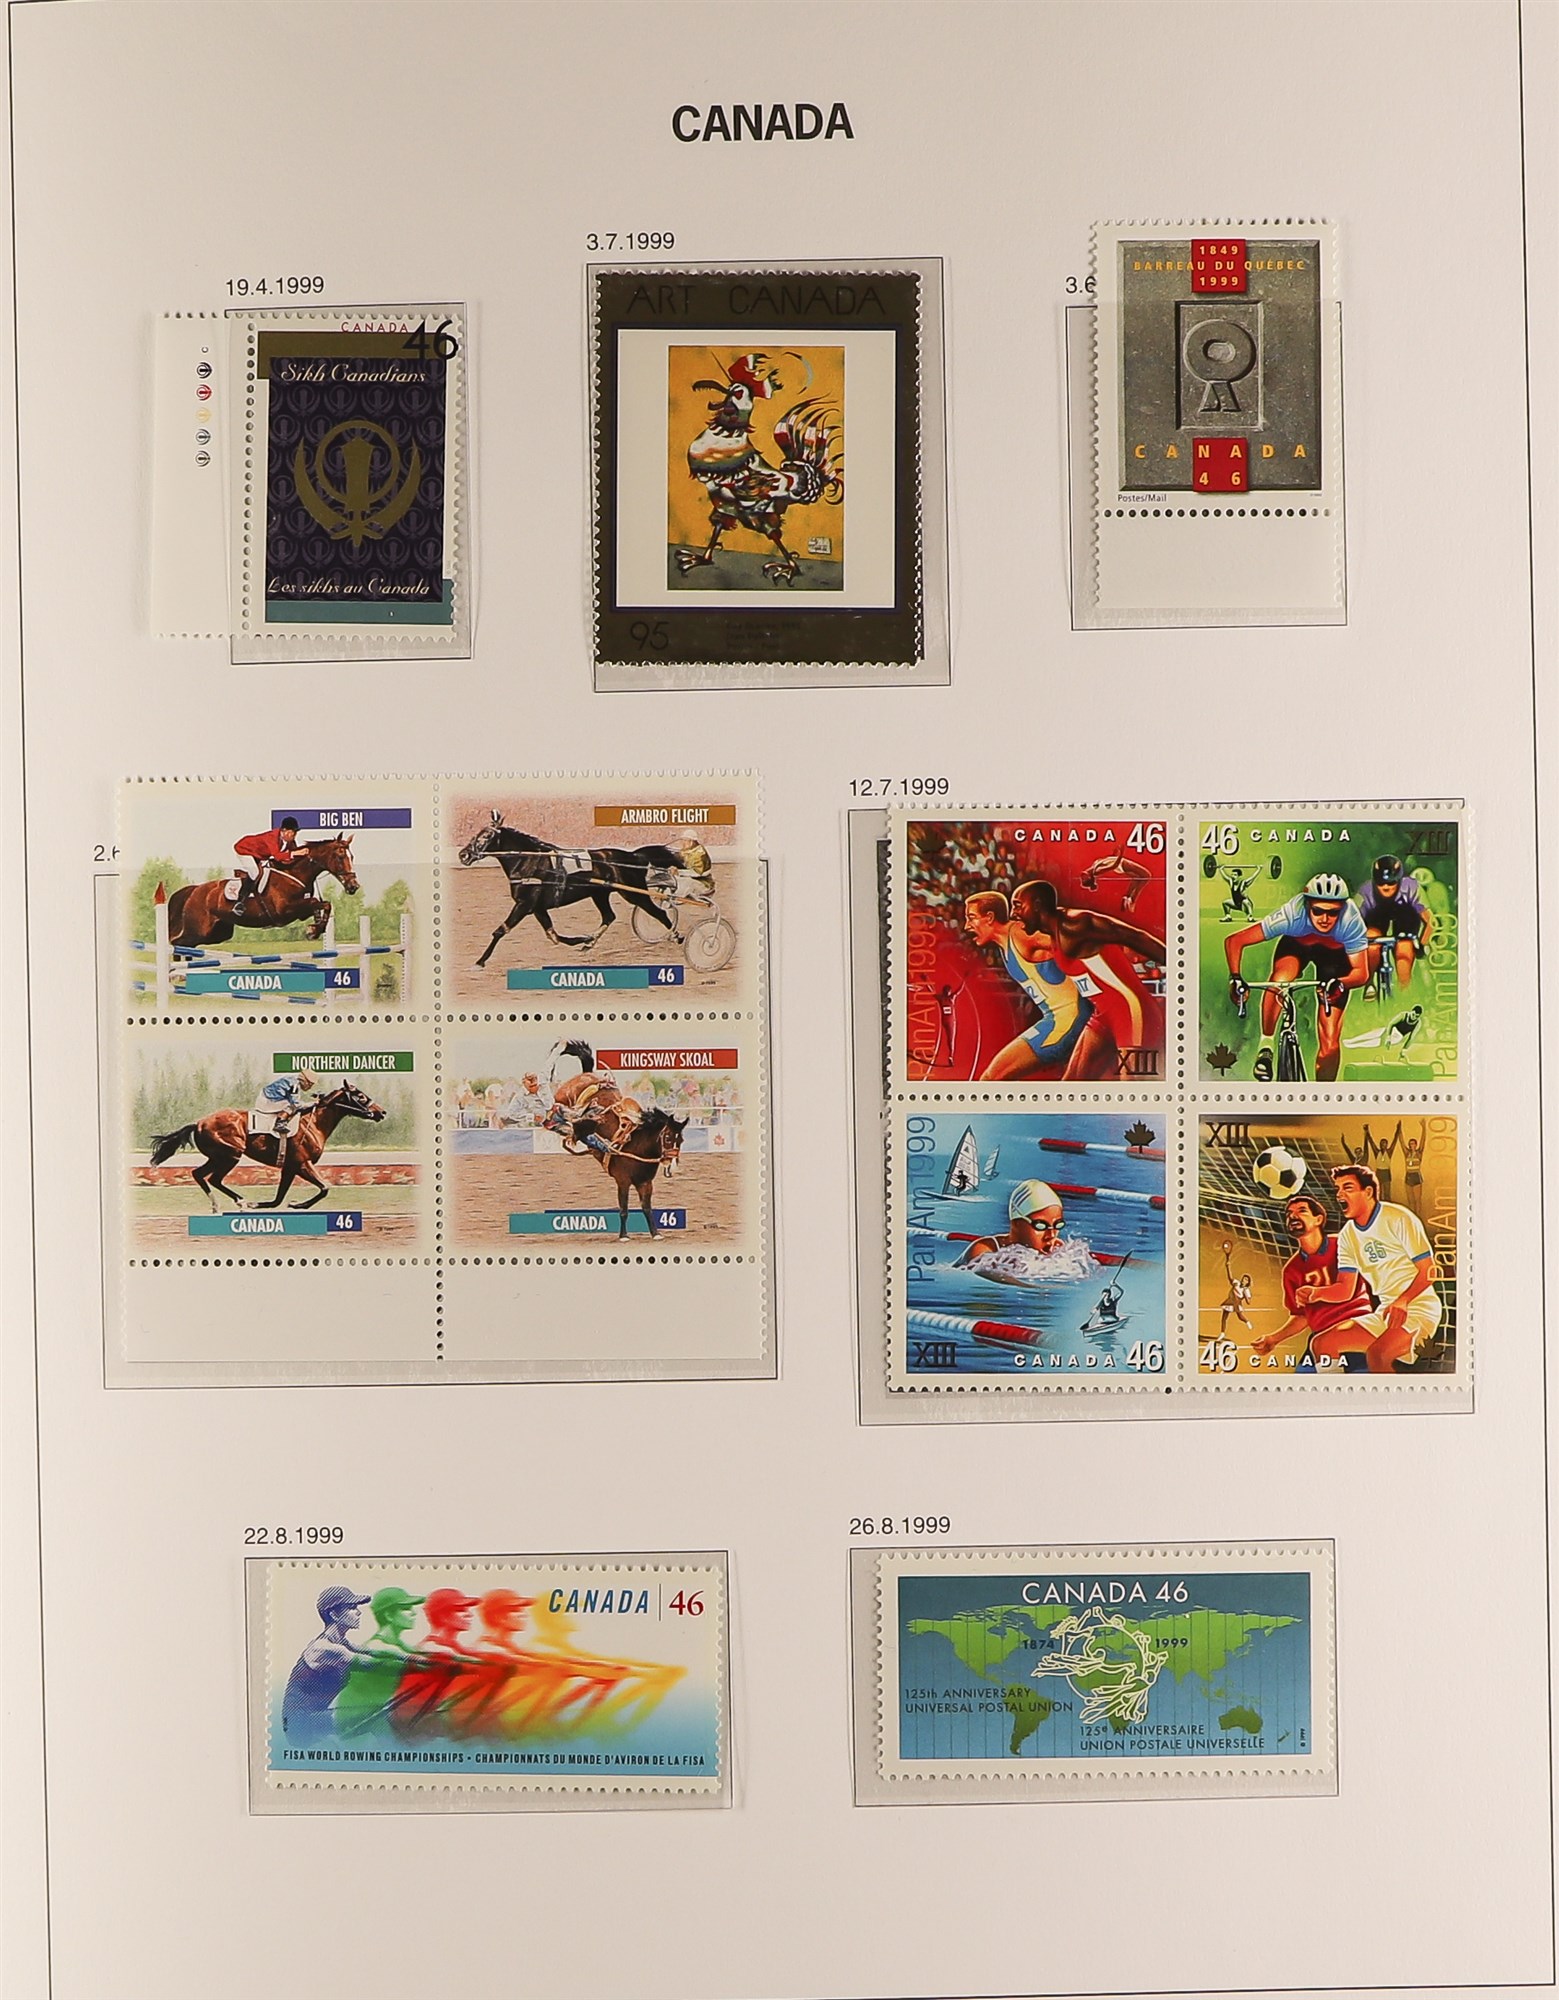 CANADA 1990 - 2002 NEVER HINGED MINT COLLECTION in DAVO Canada hingeless album, largely complete ( - Image 8 of 13